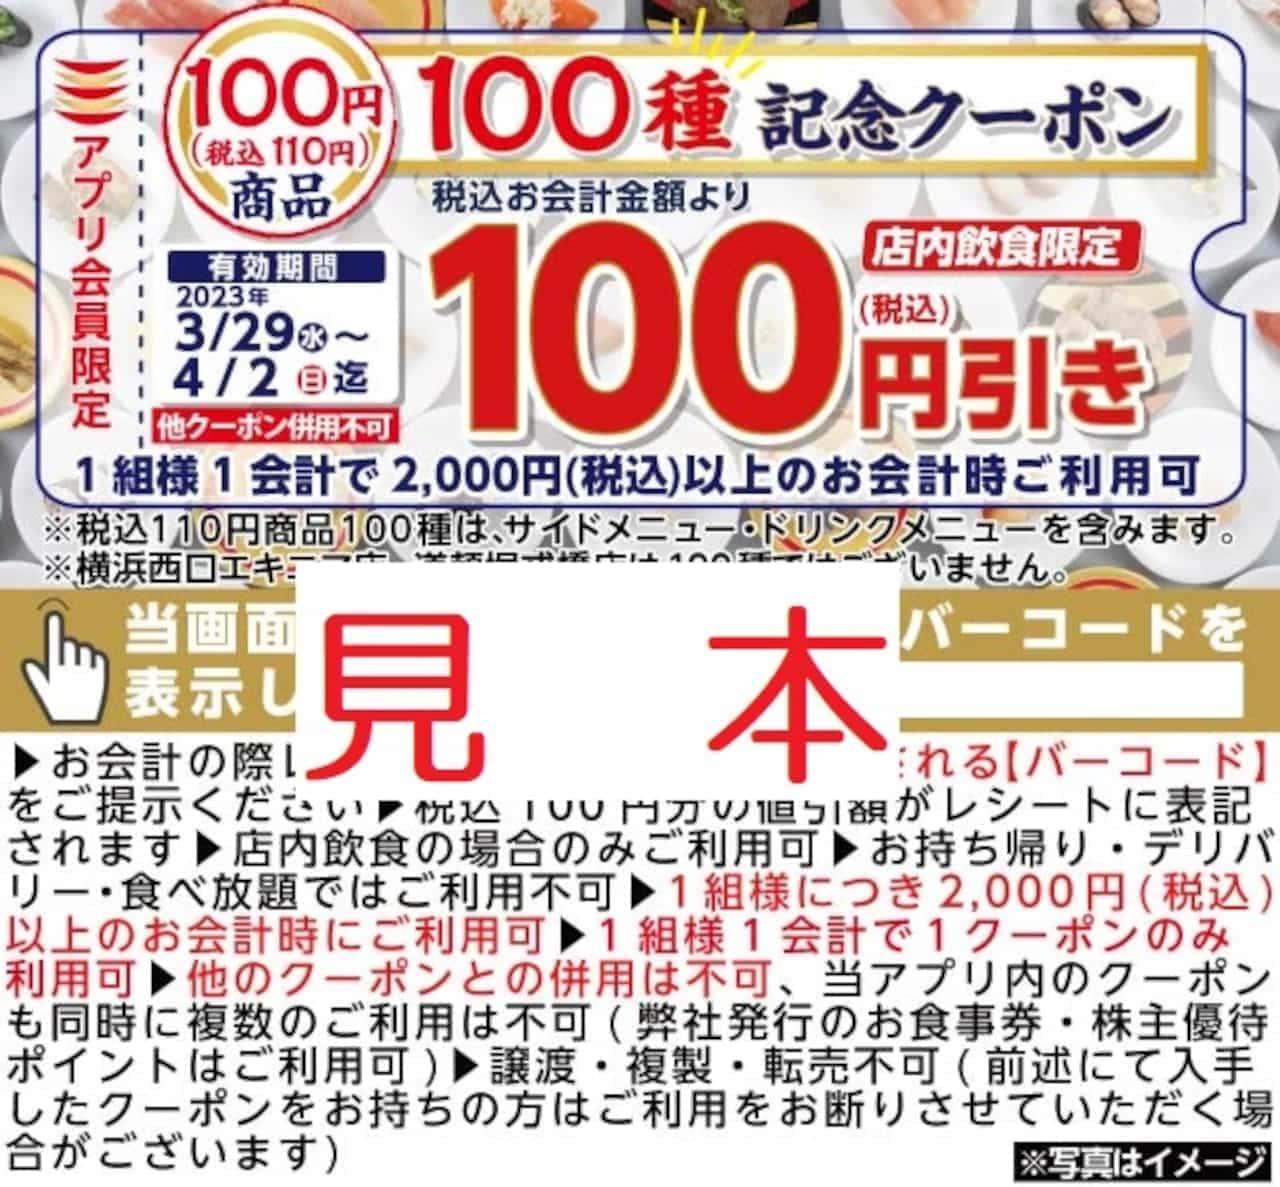 Kappa Sushi "In-store food and beverage limited: 100 yen discount campaign for bill over 2,000 yen".